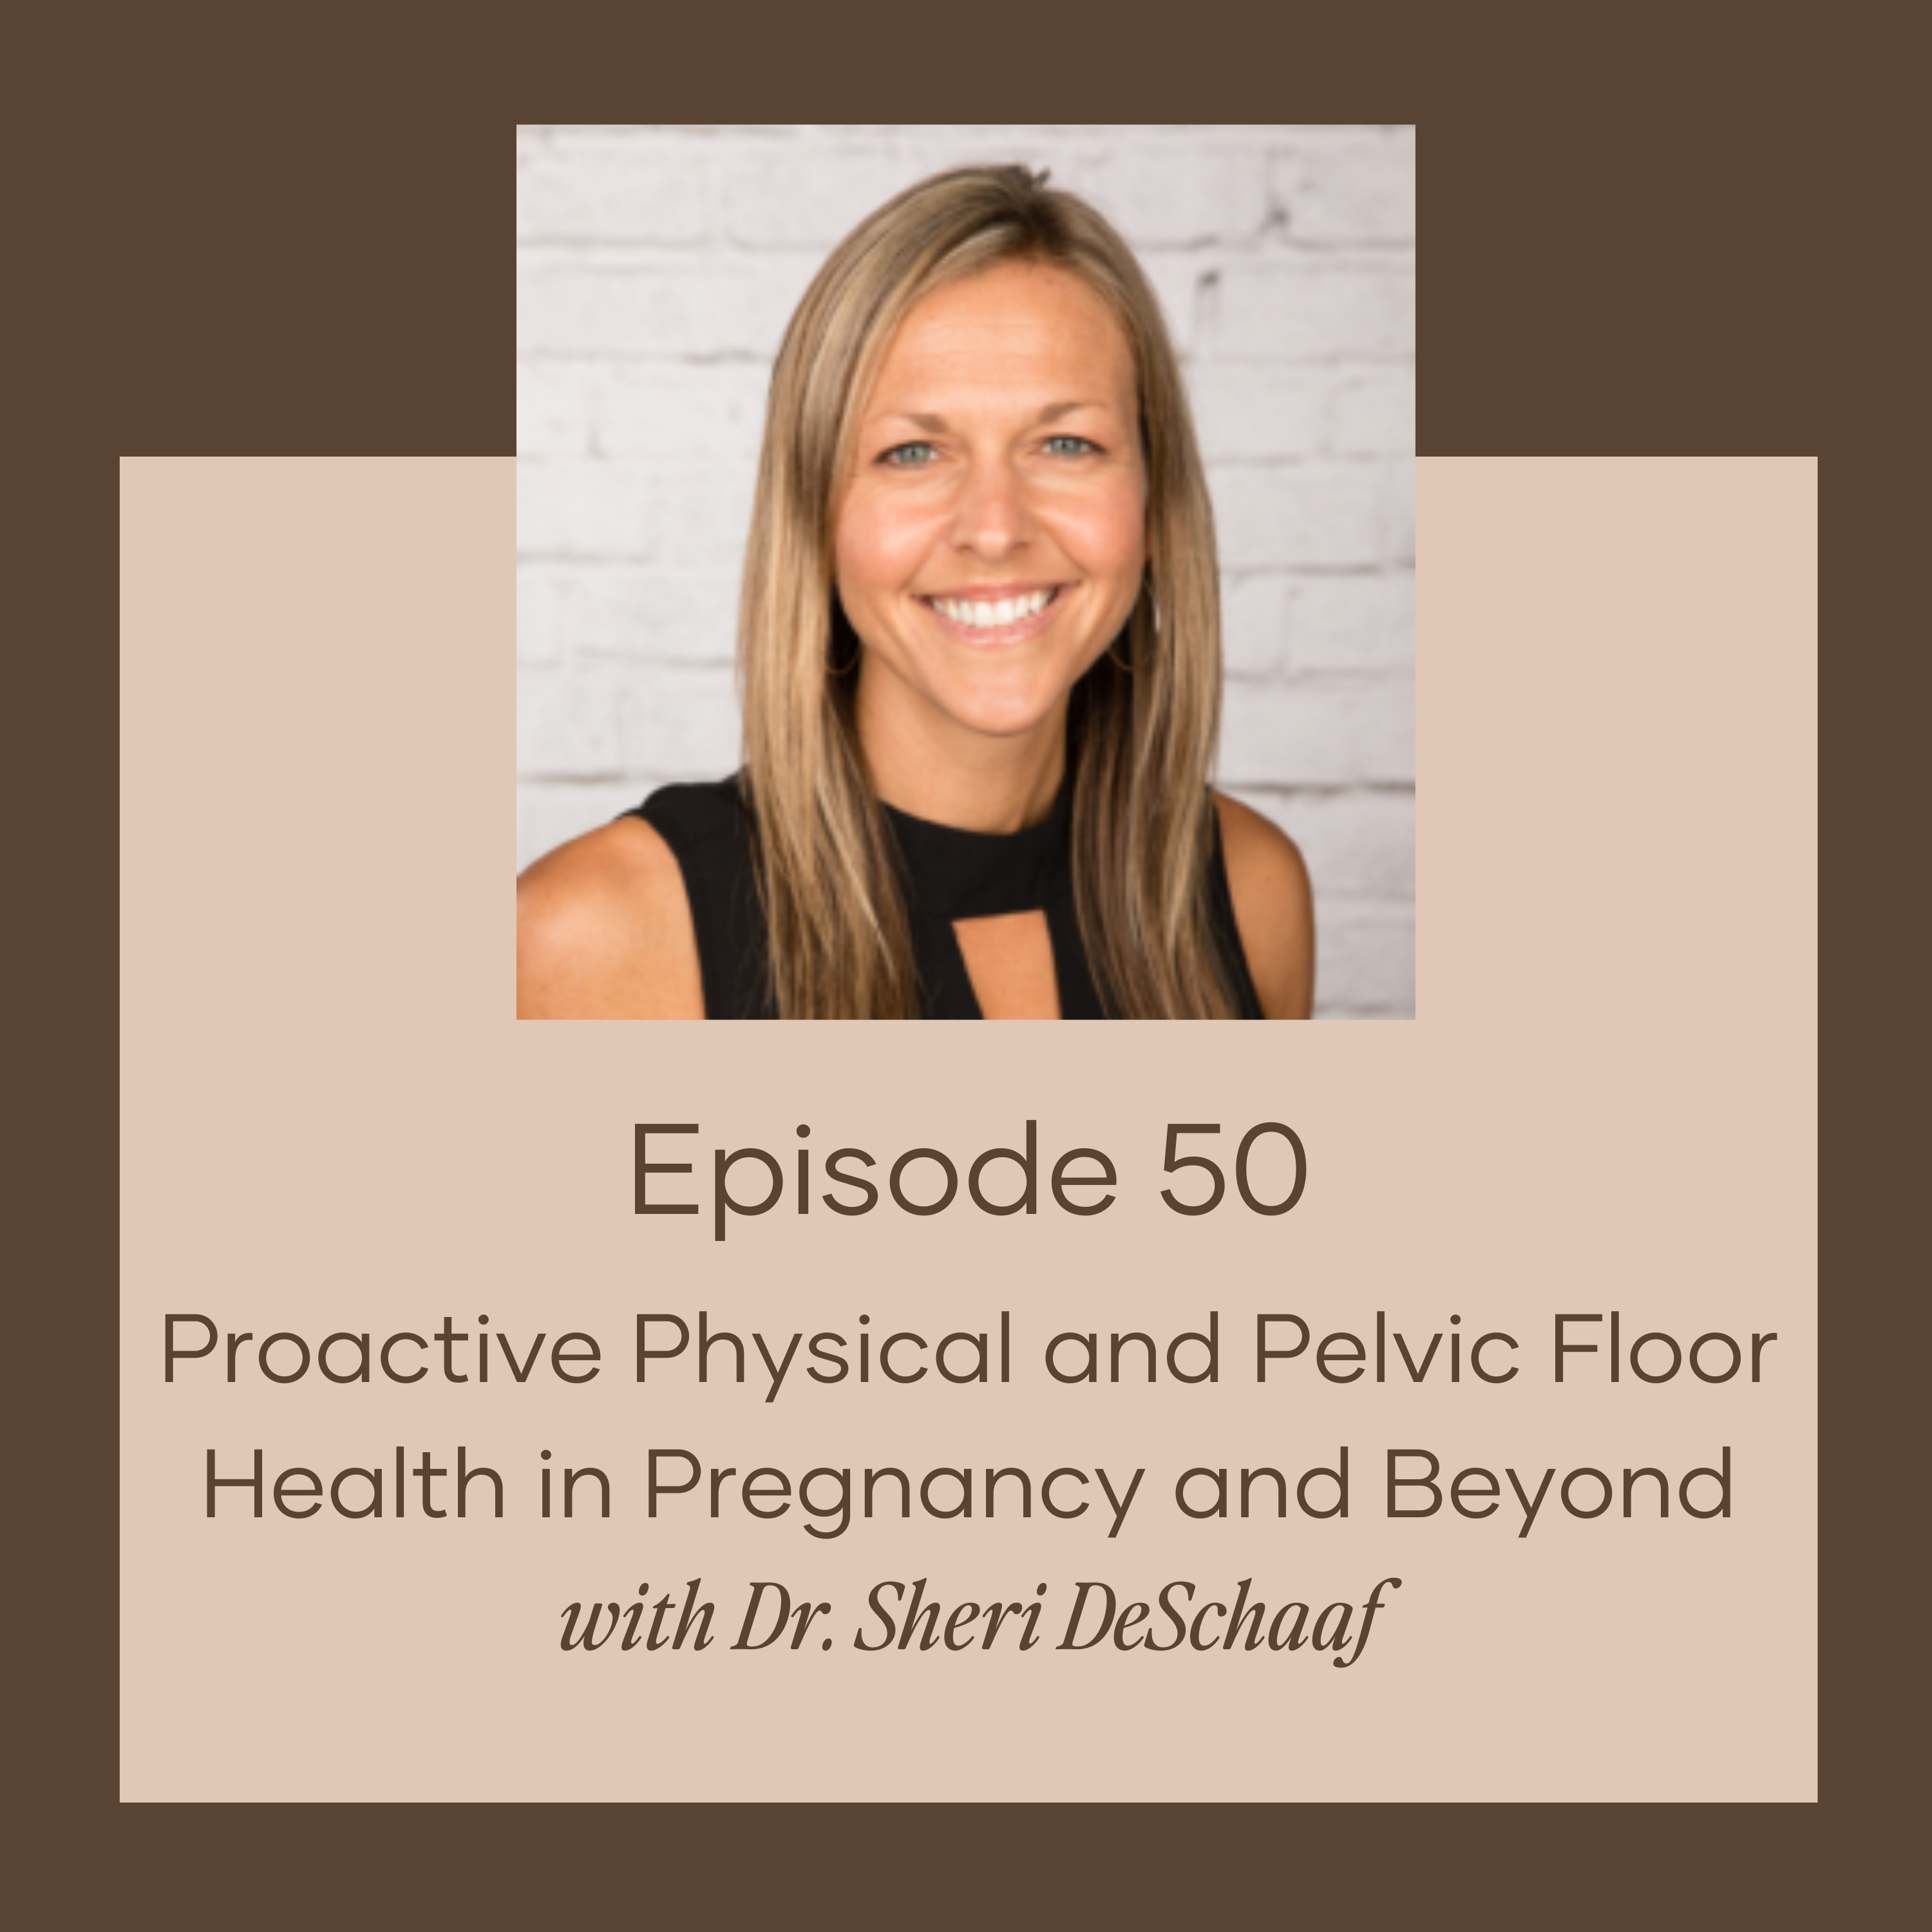 Proactive Physical and Pelvic Floor Health in Pregnancy and Beyond